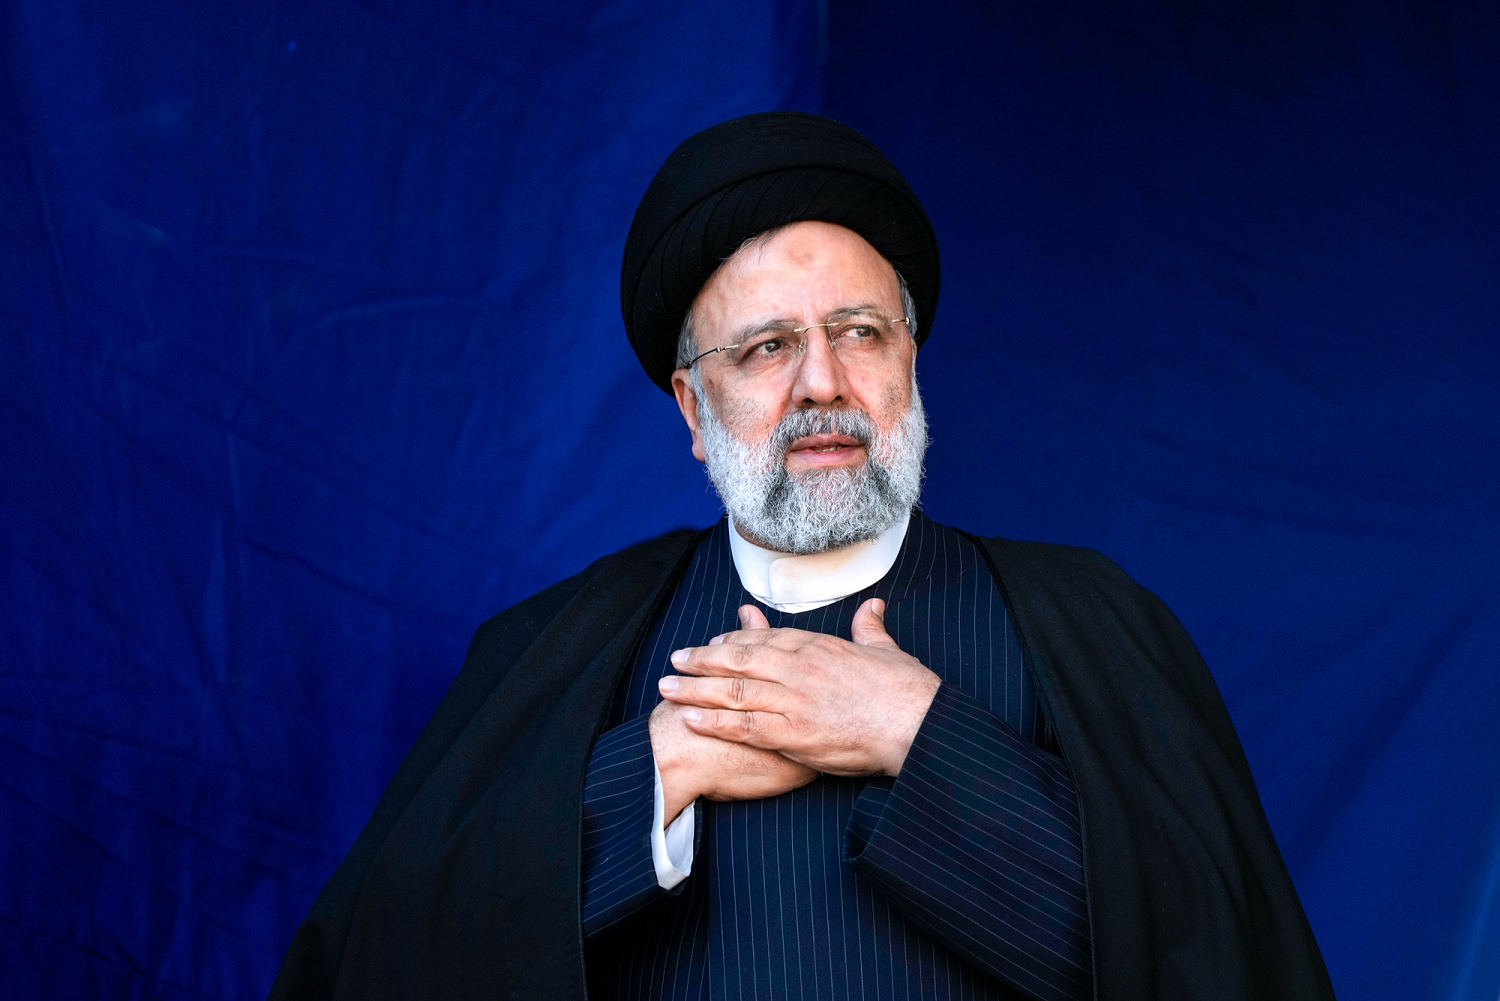 Iran's president Ebrahim Raisi killed in helicopter crash; no foul play suspected